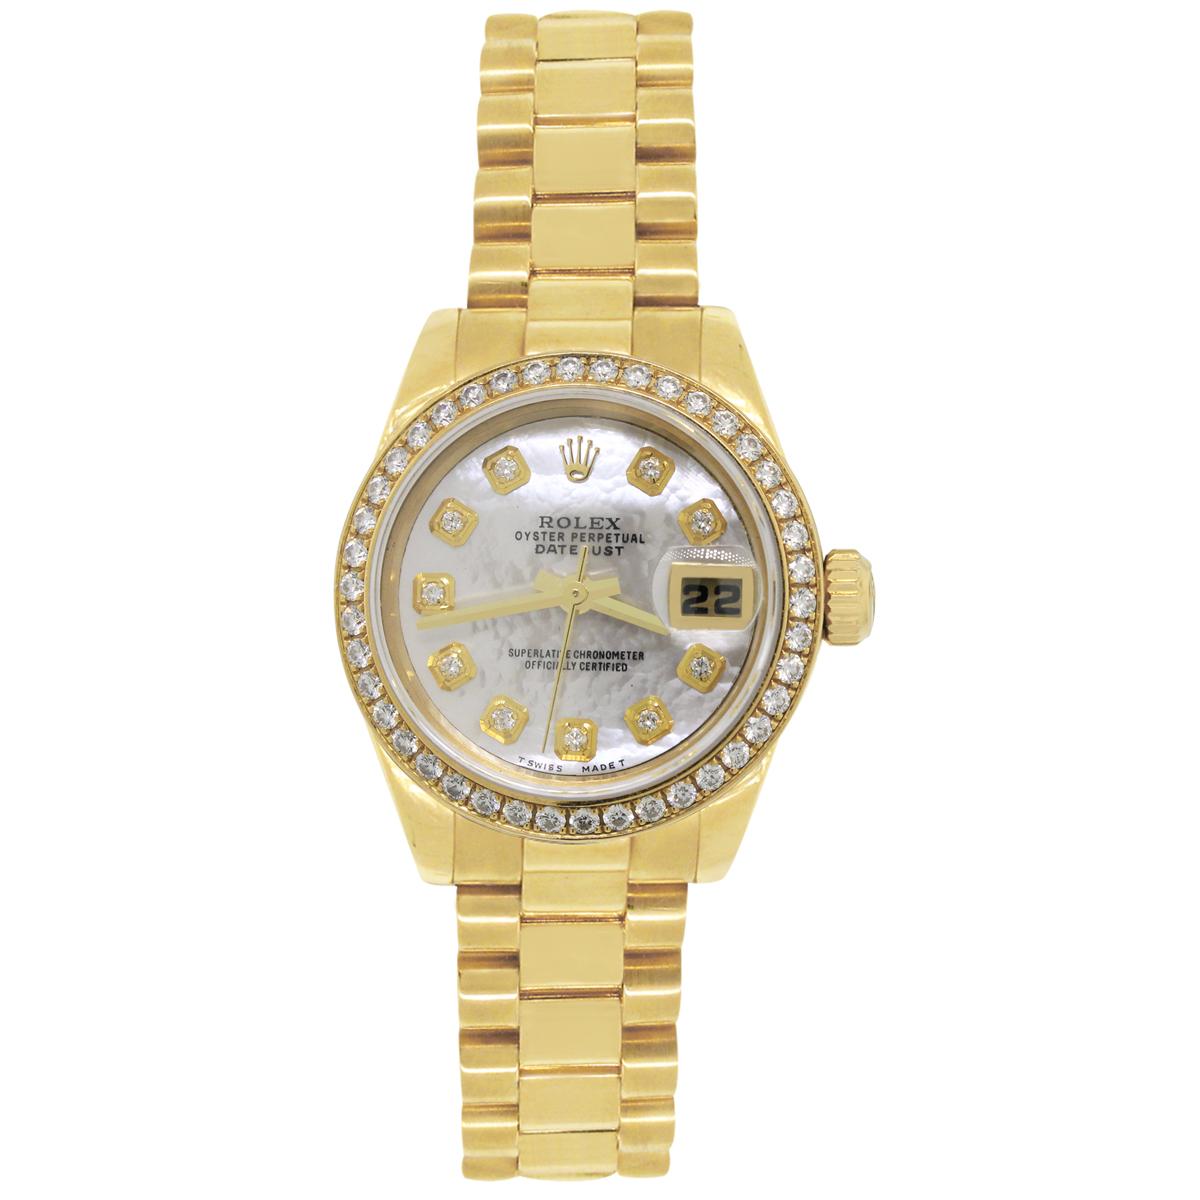 Brand: Rolex
MPN: 179138
Model: Presidential
Case Material: 18k yellow gold
Case Diameter: 26mm
Bezel: Factory 18k yellow gold diamond bezel
Dial: Factory dial with diamond hour markers, yellow gold hands and date window at the 3 o’clock